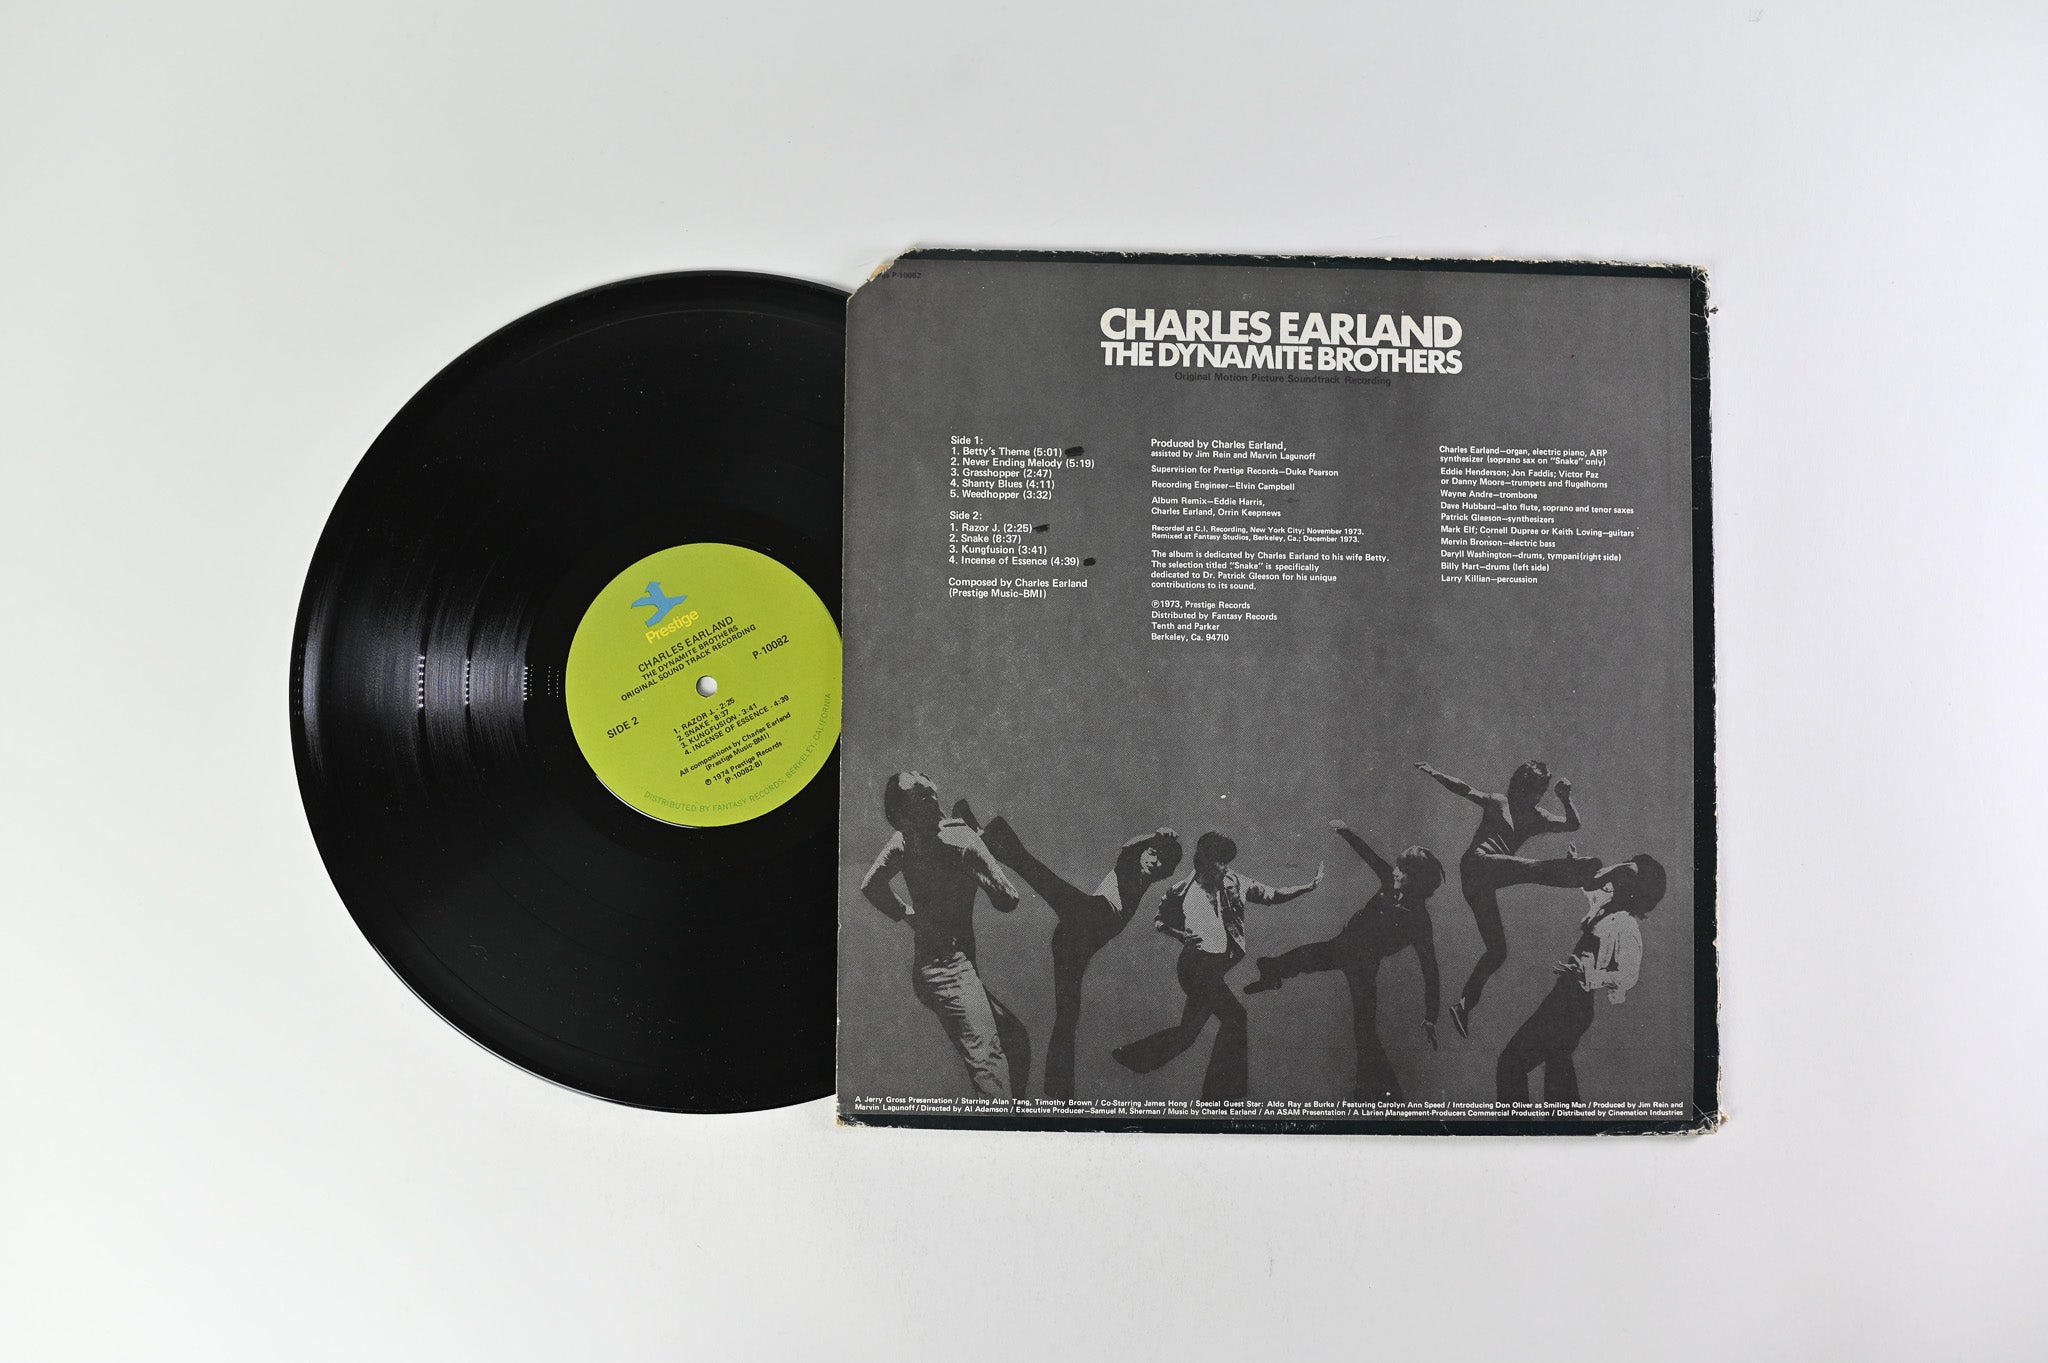 Charles Earland - The Dynamite Brothers (Original Motion Picture Soundtrack Recording) on Prestige